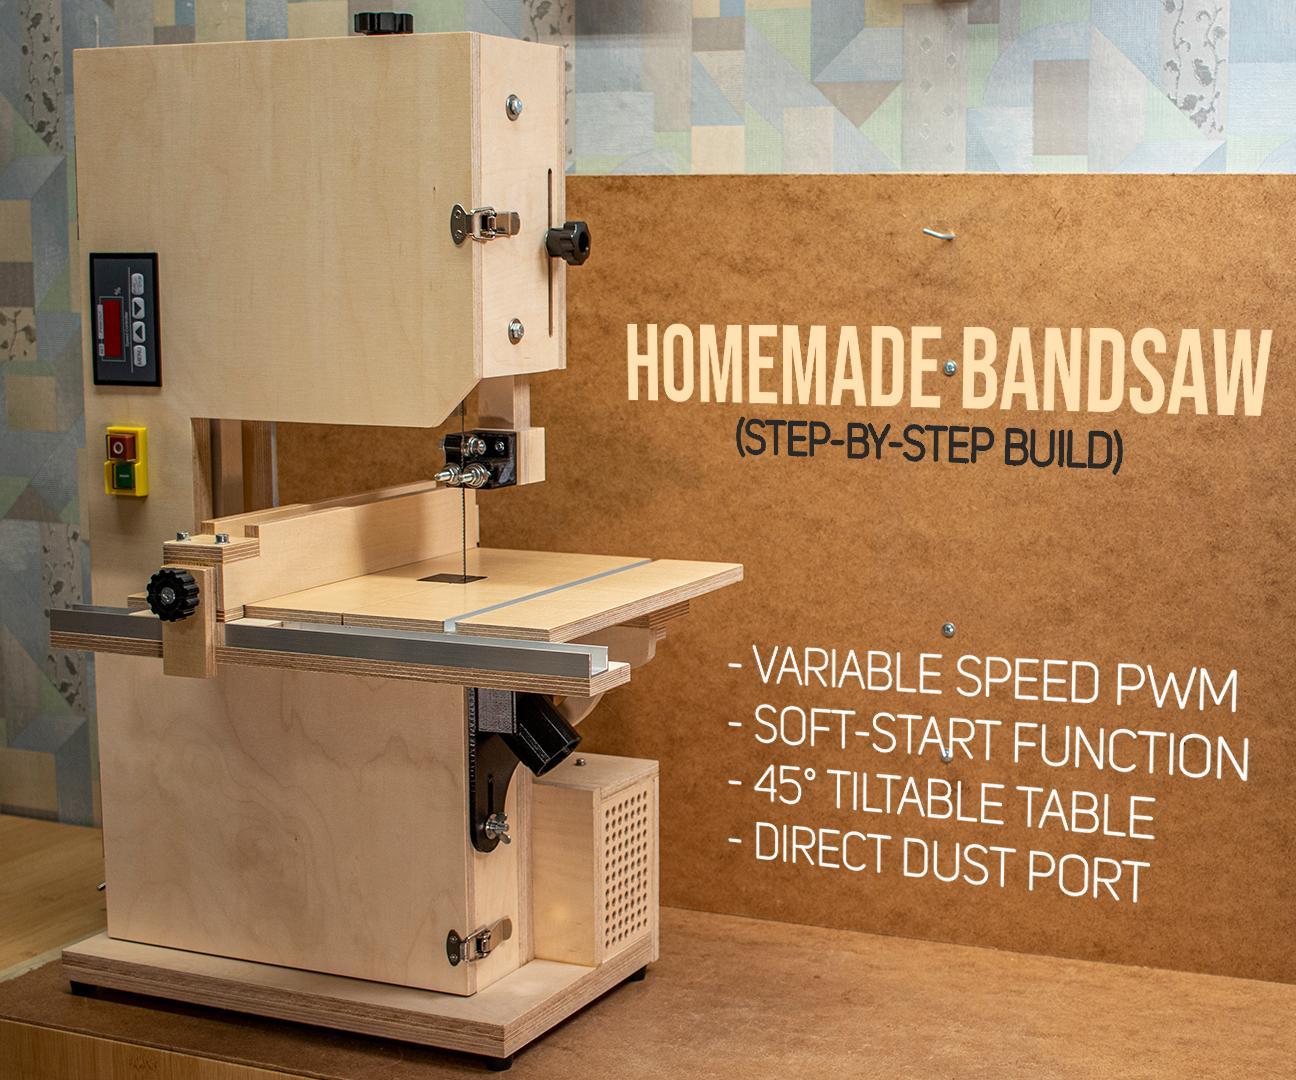 Homemade Bandsaw by DIY Enthusiast